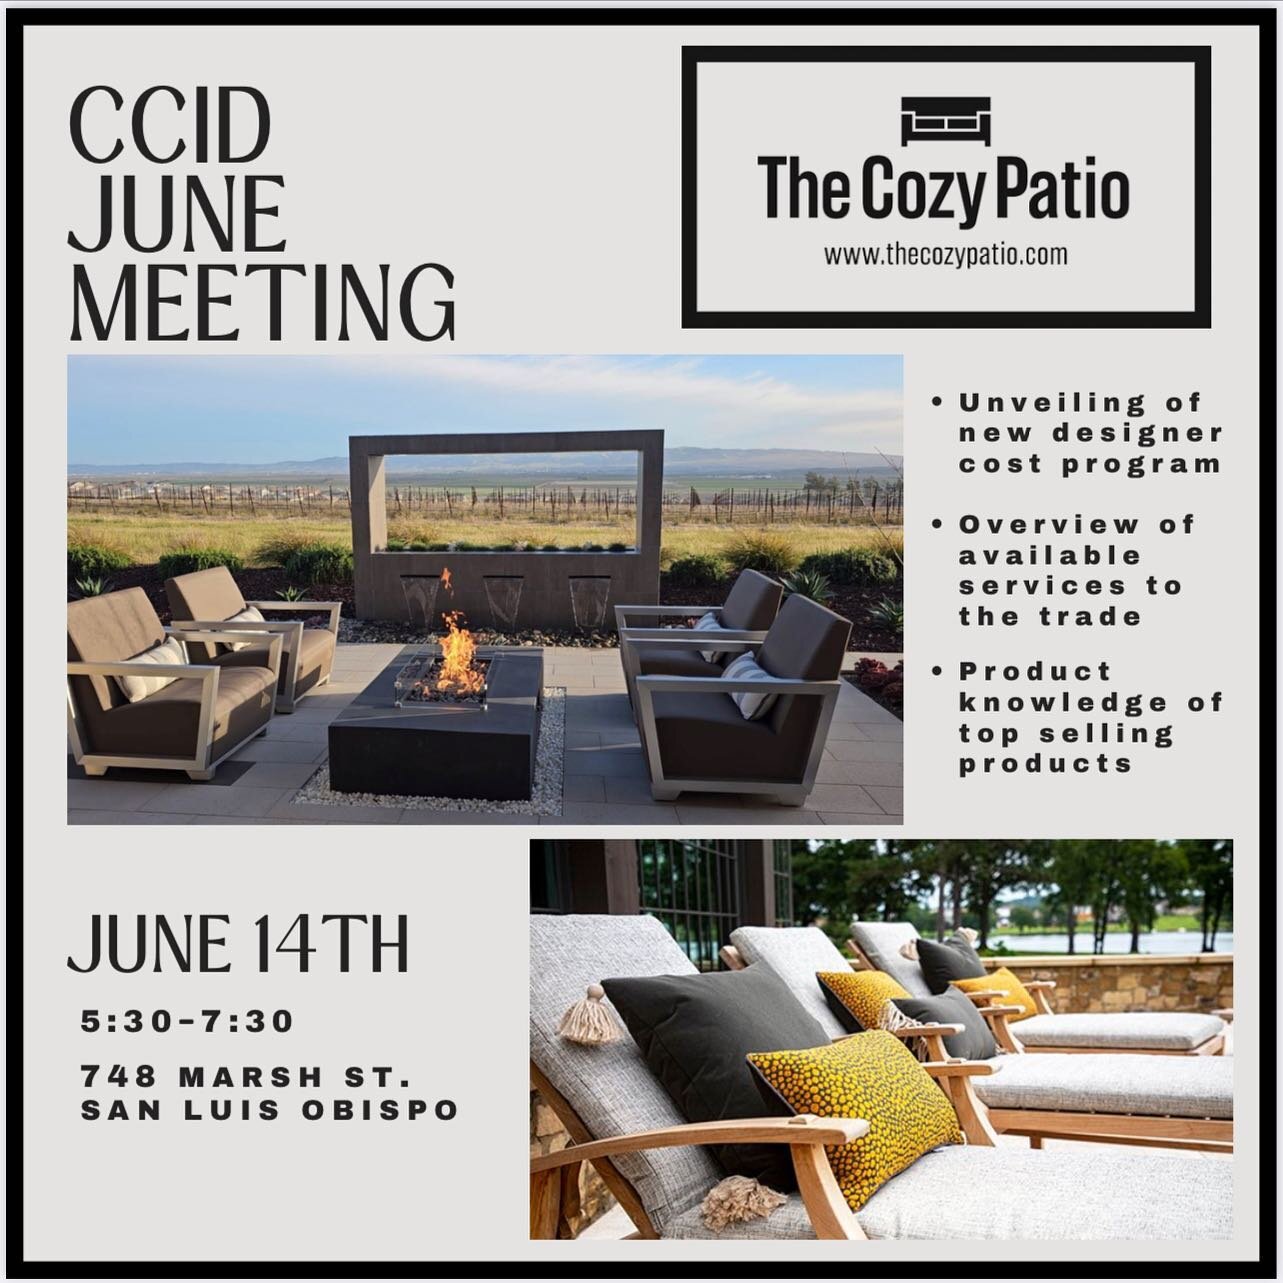 Our June event is this Wednesday! Hope to see you there! @the_cozy_patio